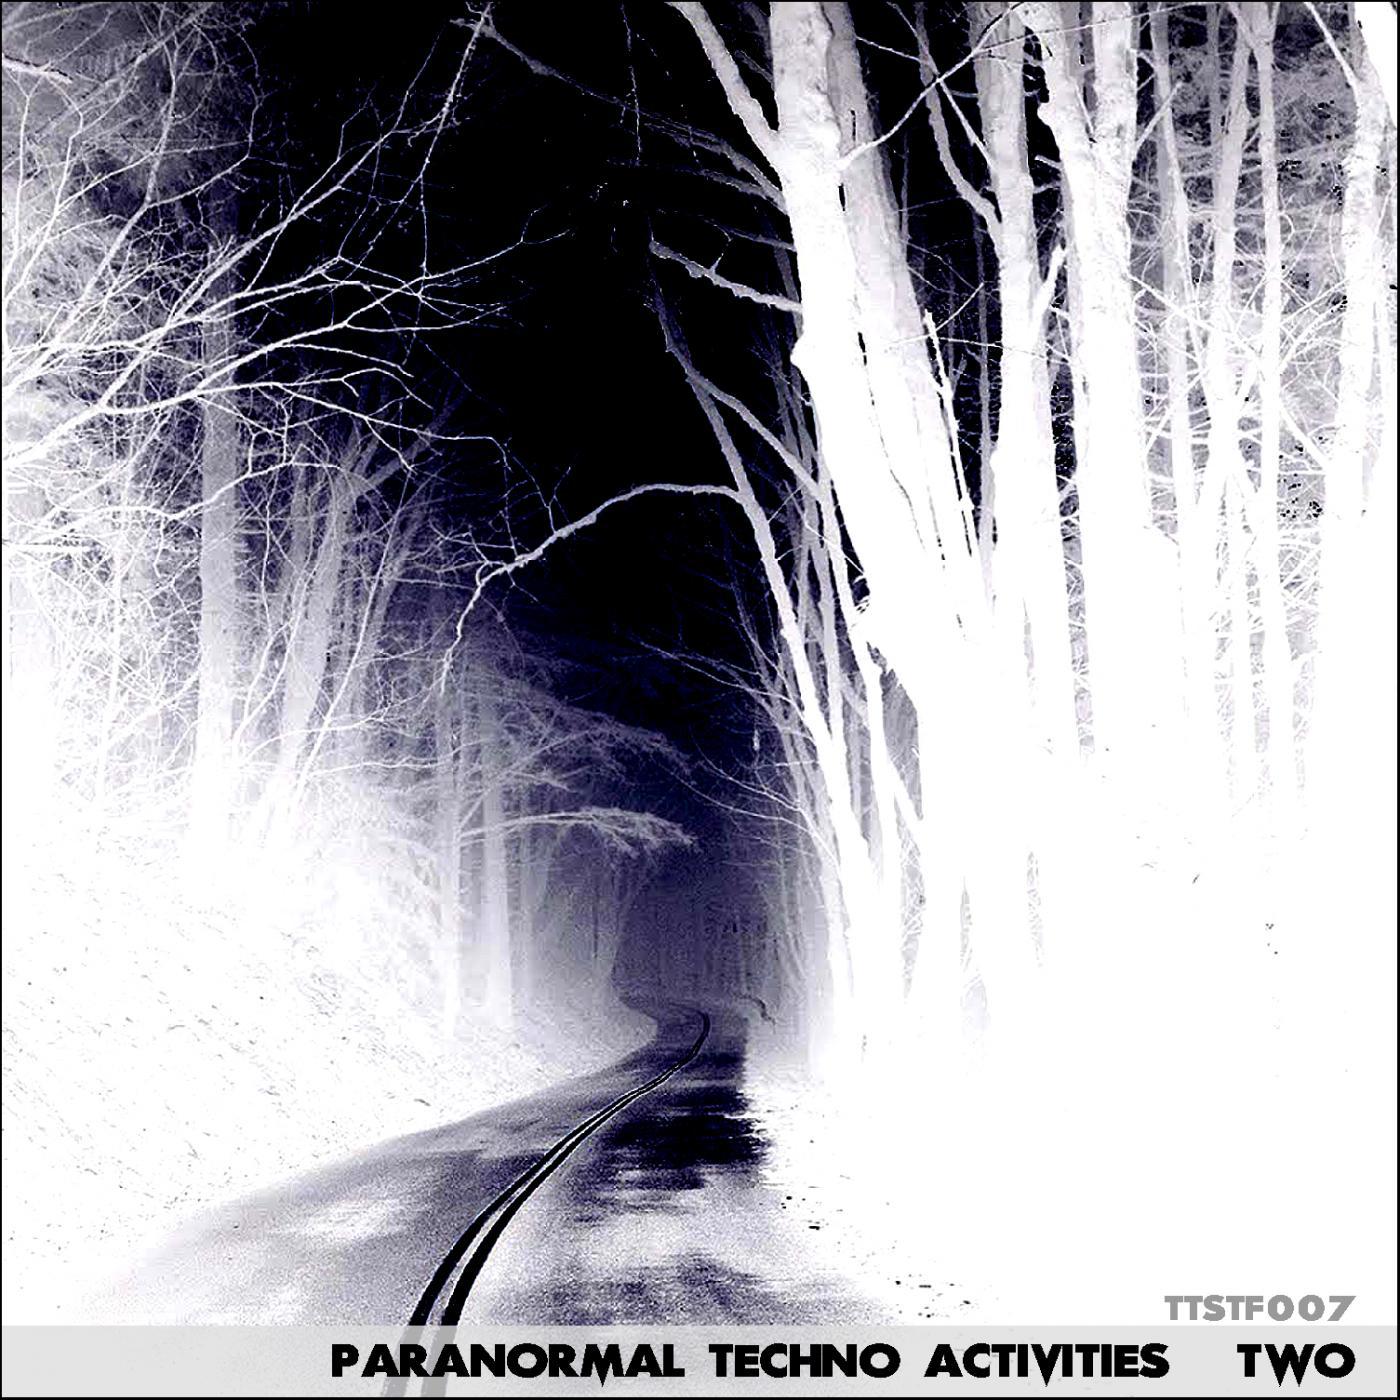 Paranormal Techno Activities - Two